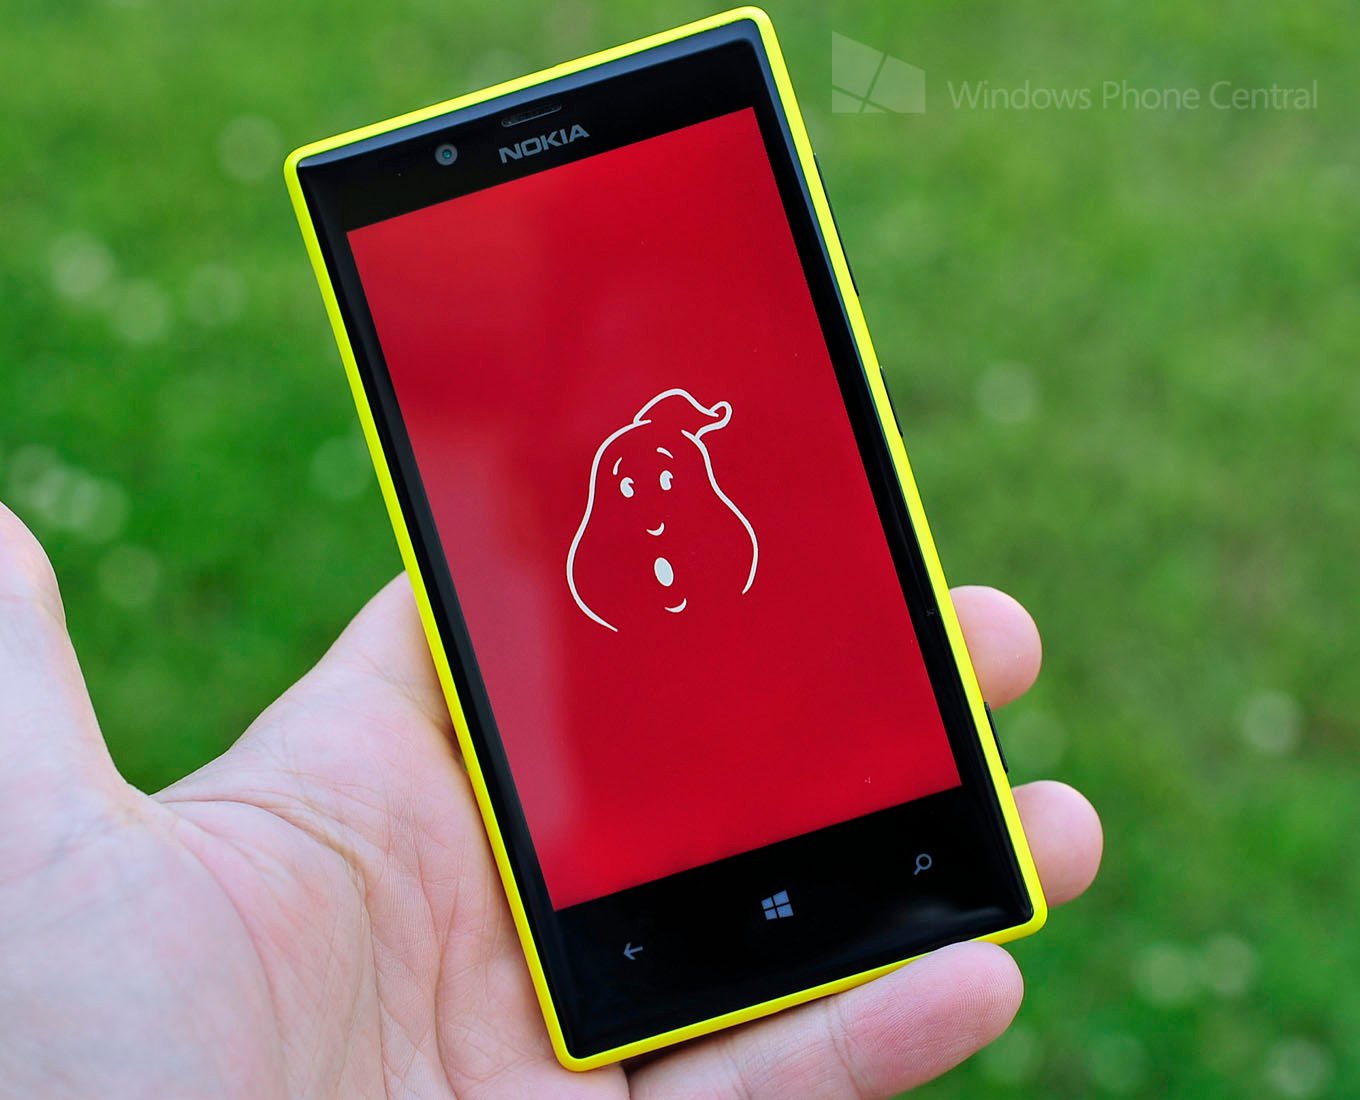 Snapchat Unofficial for Windows Phone 8